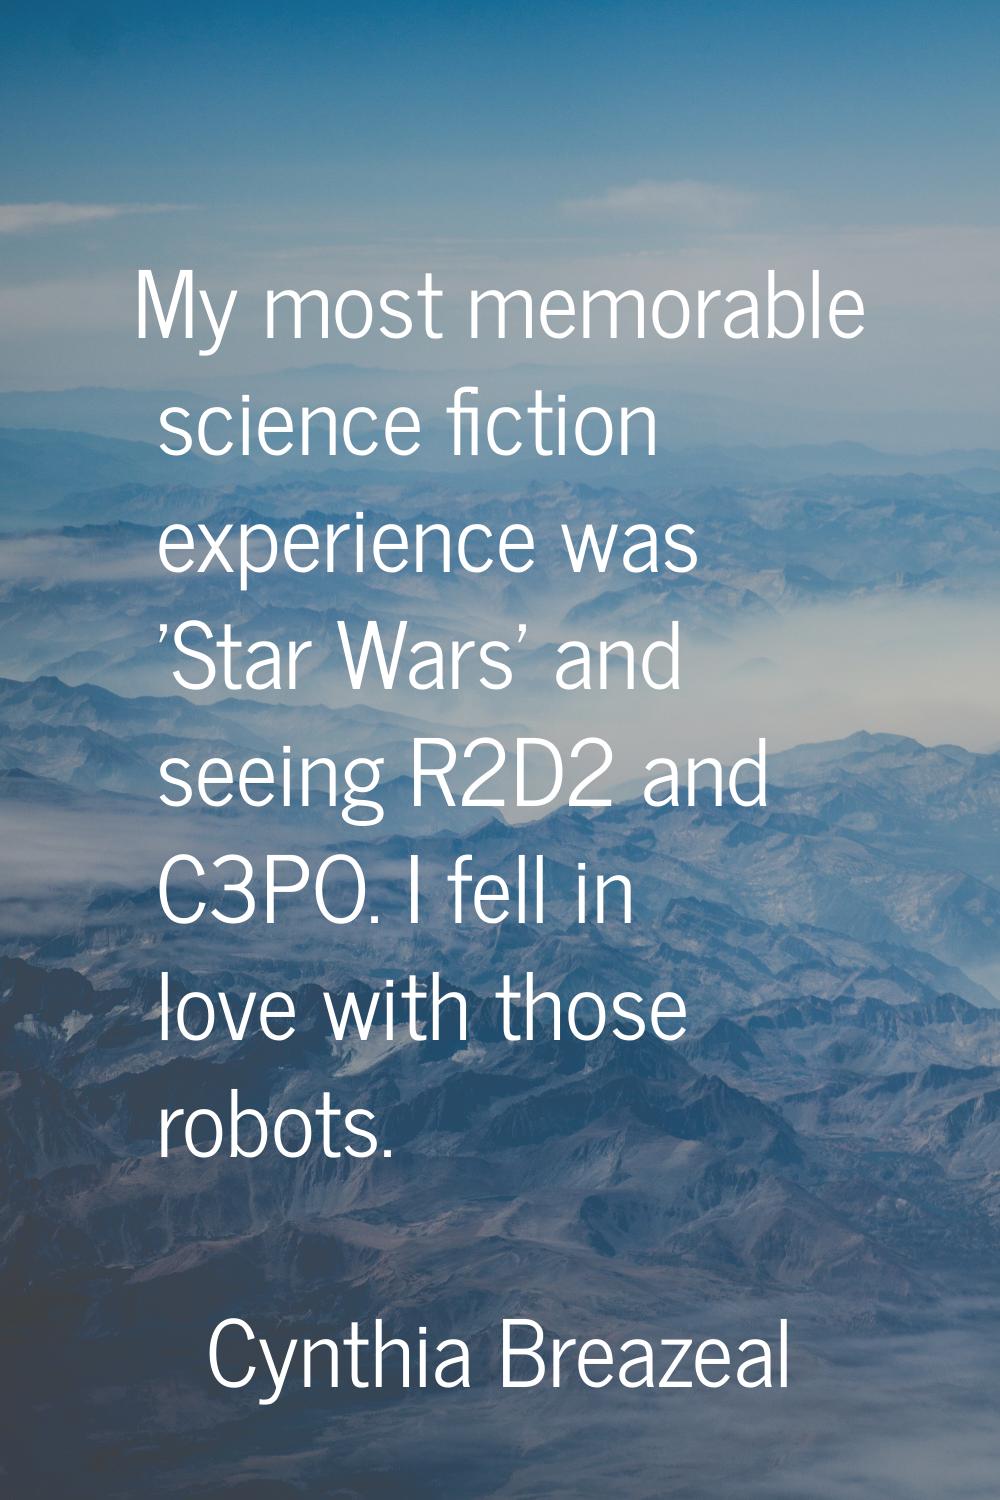 My most memorable science fiction experience was 'Star Wars' and seeing R2D2 and C3PO. I fell in lo